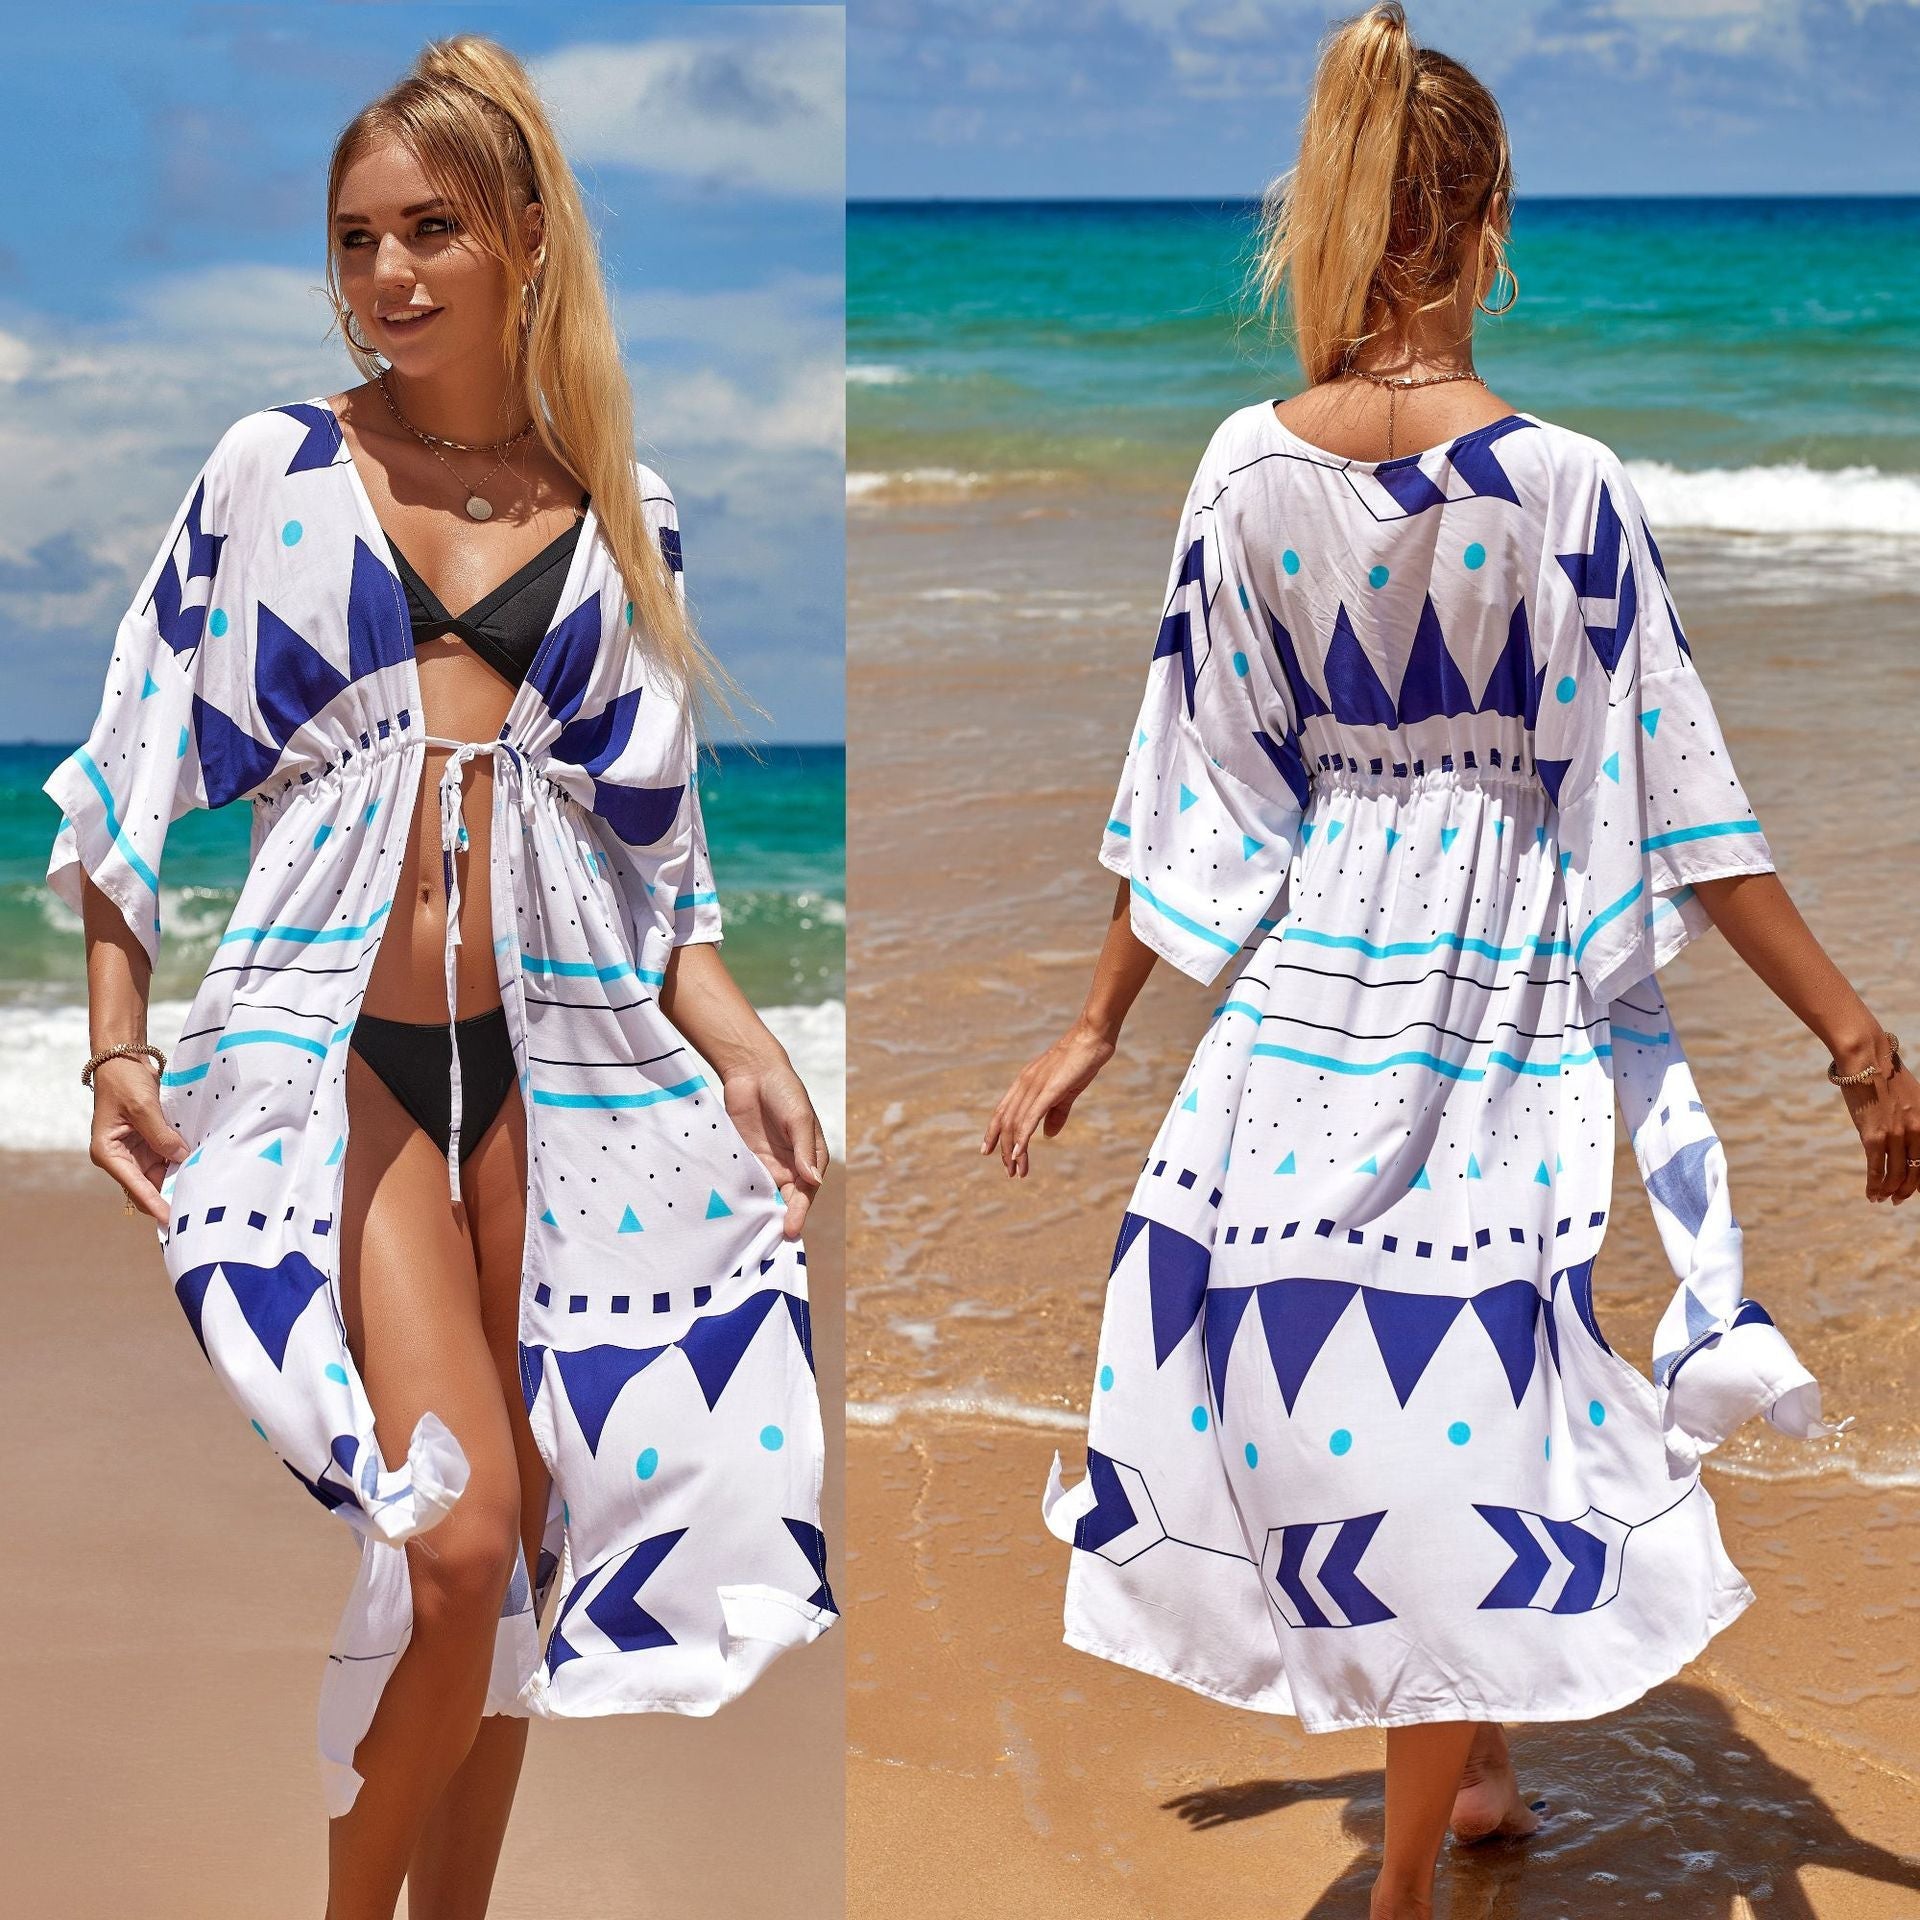 BEACH SARONG BEACH COVER UP SWIMSUIT COVER UP Bathing Suit Cover Up PAREO